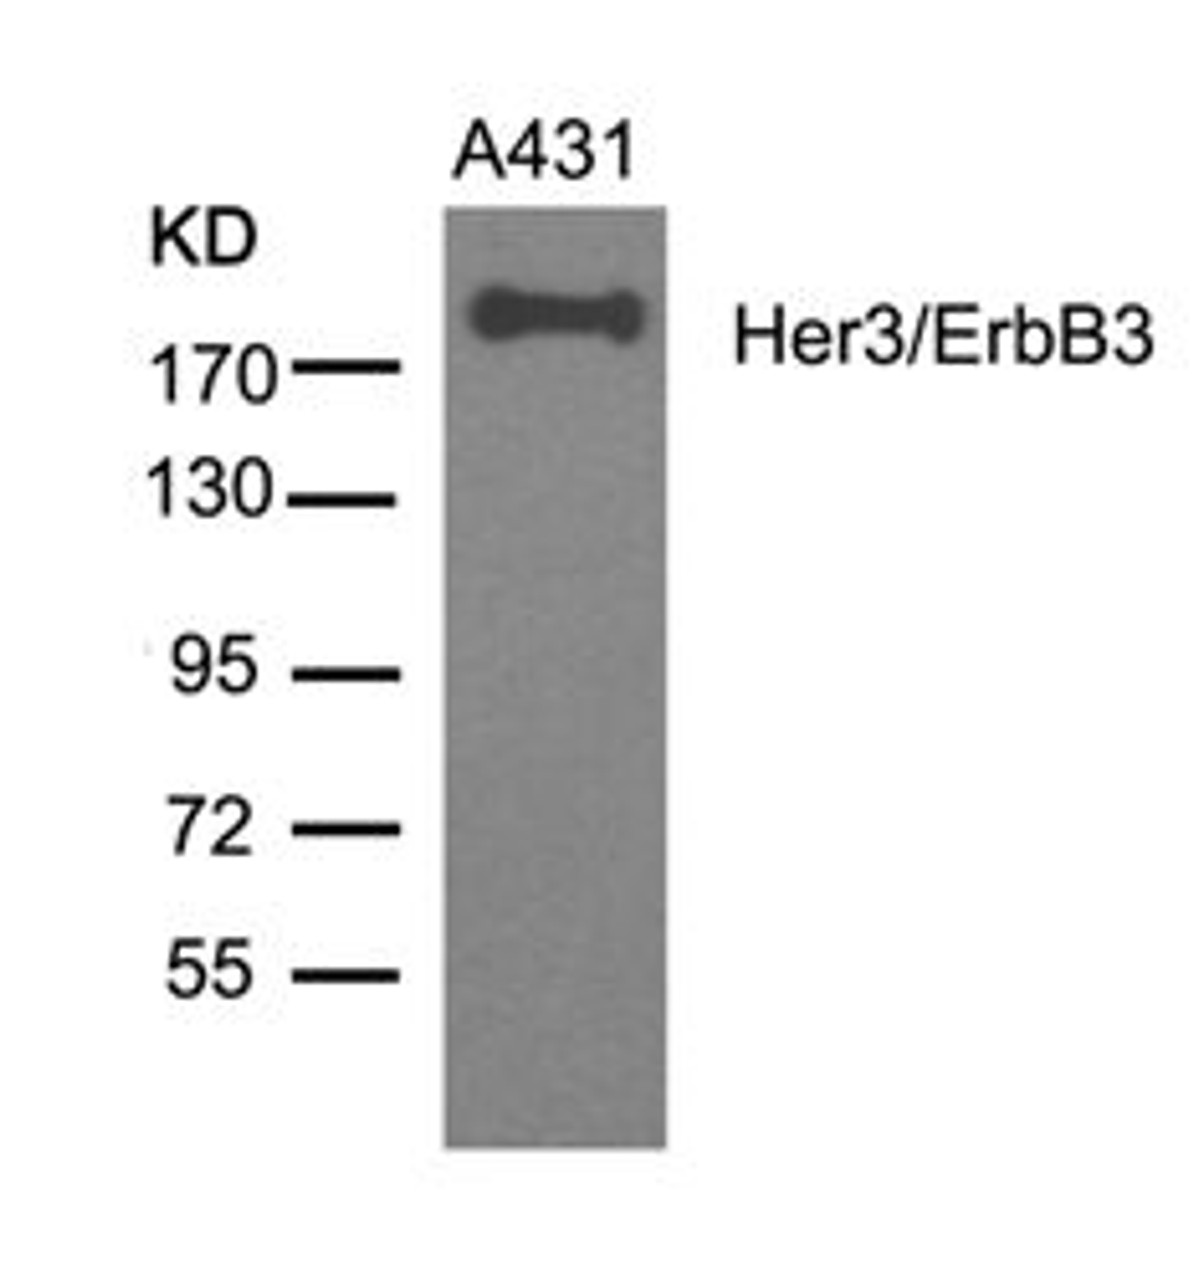 Western blot analysis of lysed extracts from A431 cells using Her3/ErbB3 (Ab-1328) .